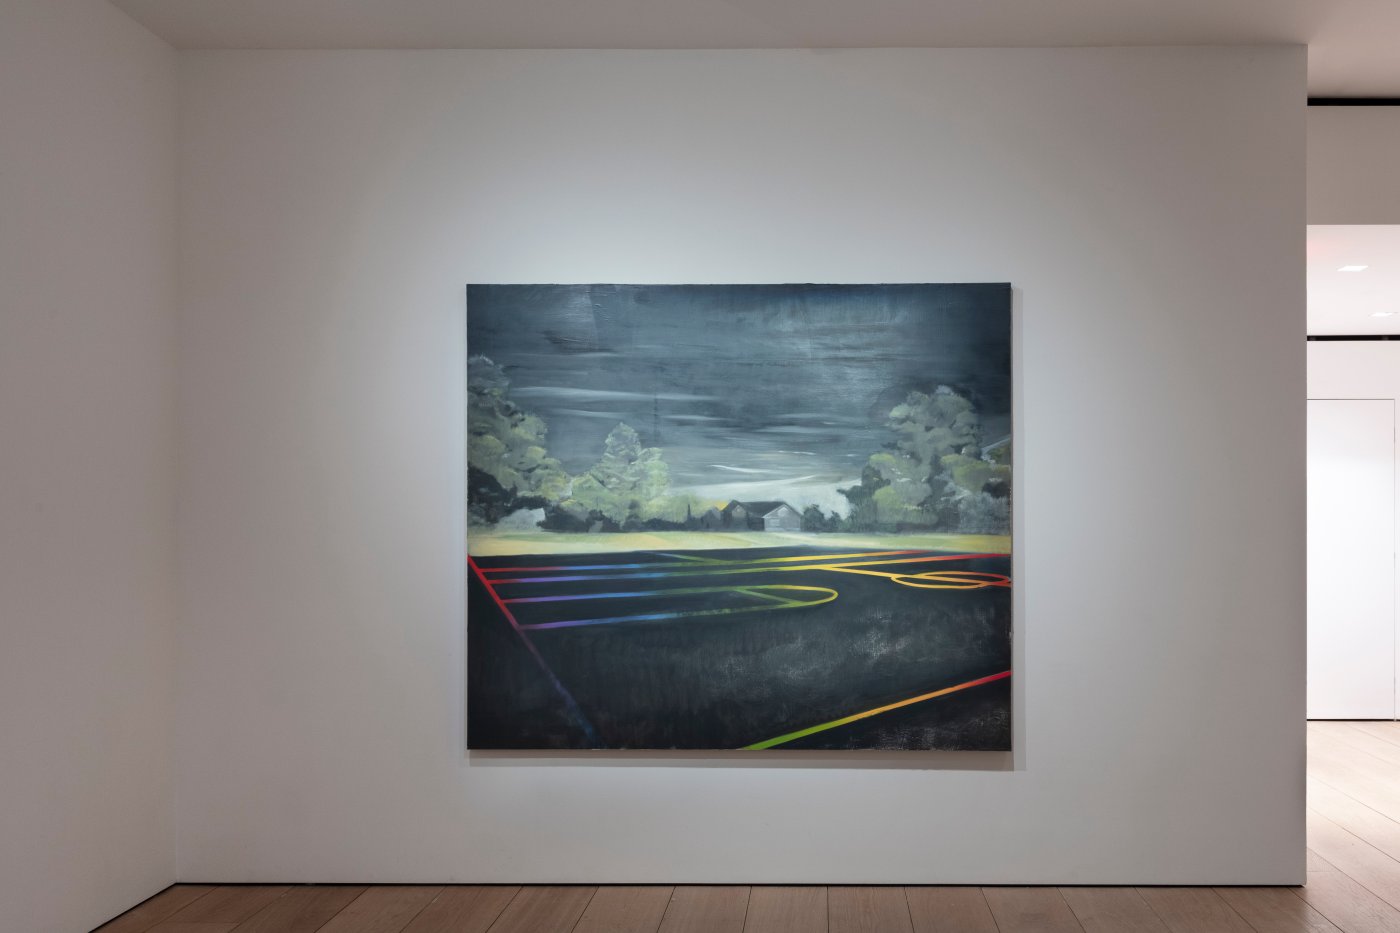 Installation image for Dominic Chambers: Soft Shadows, at Lehmann Maupin